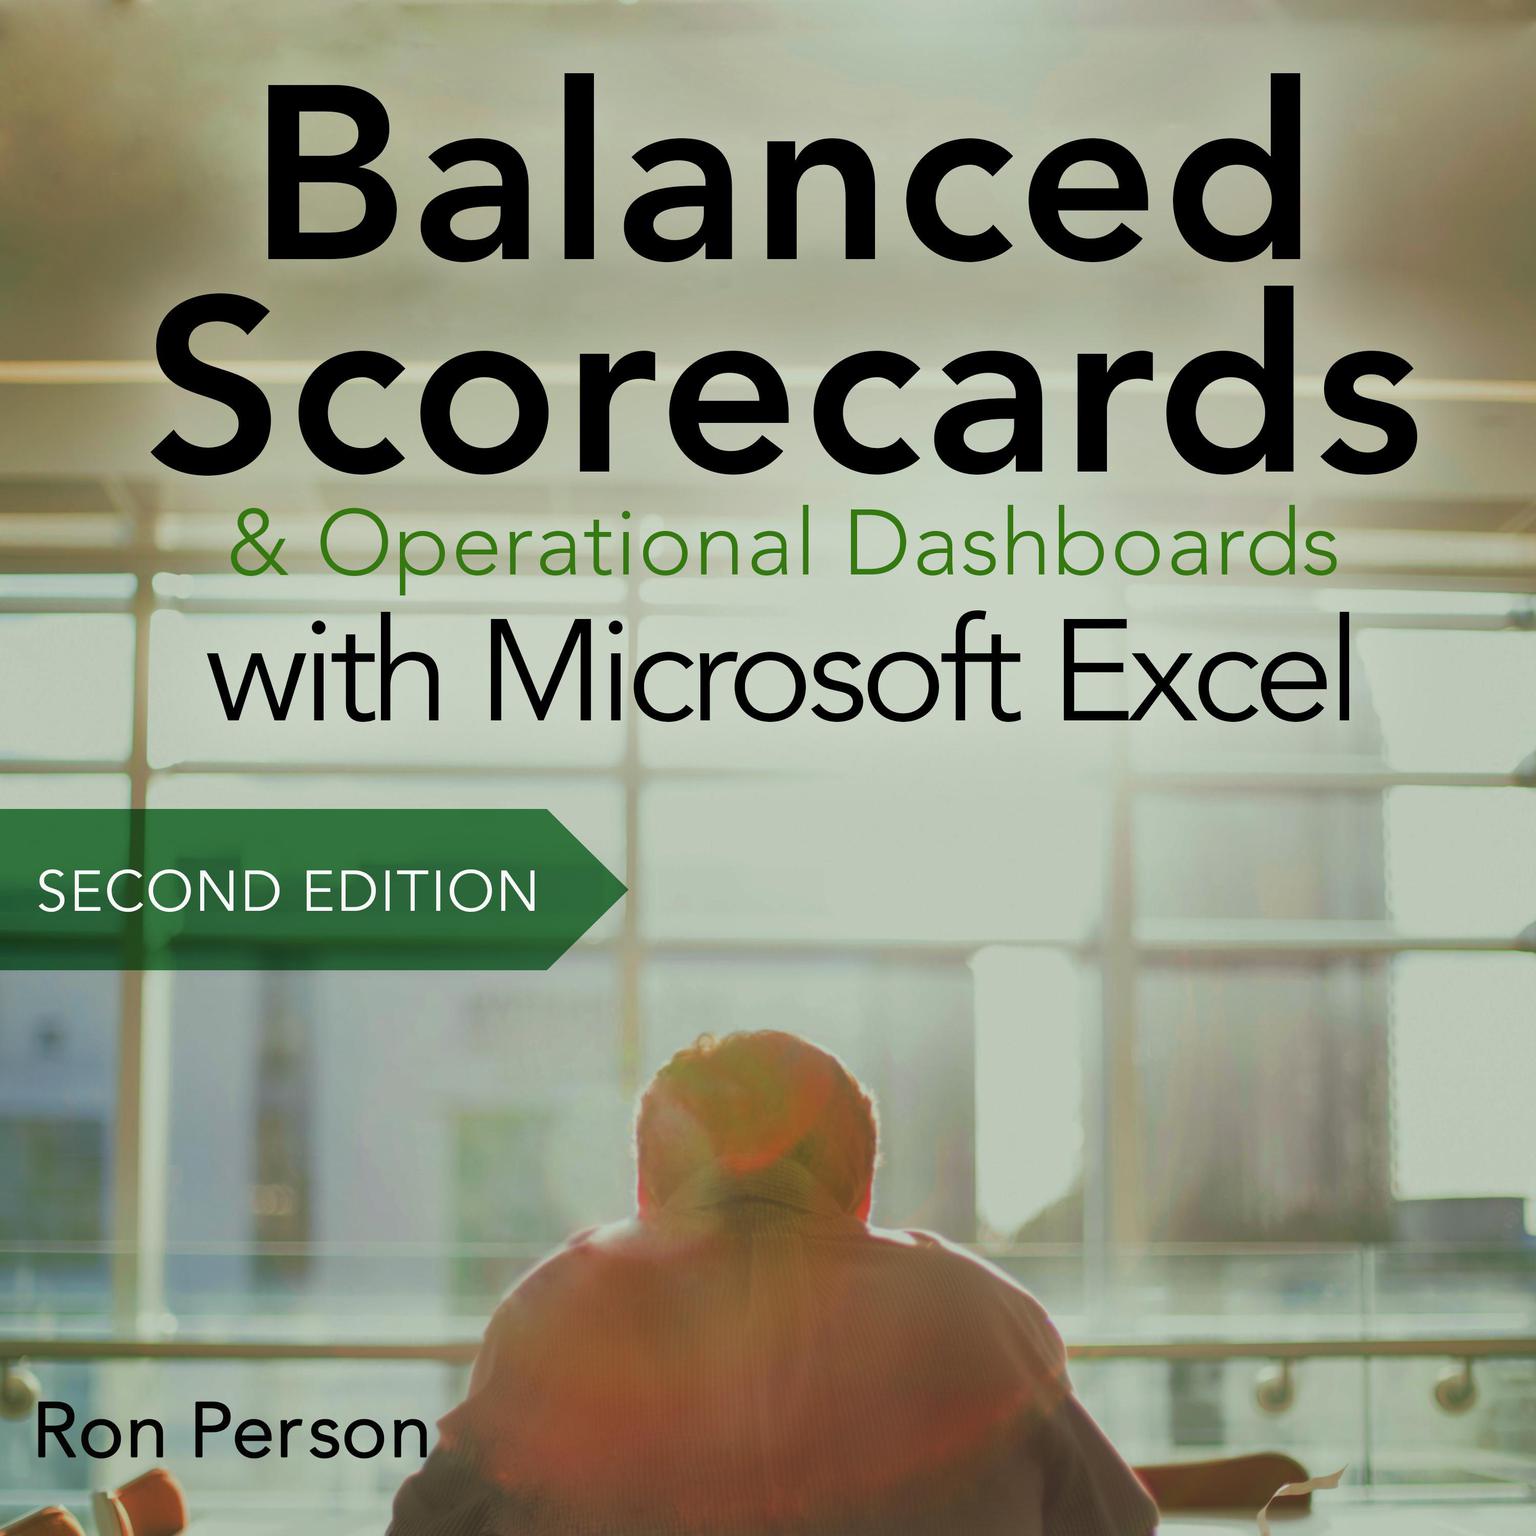 Balanced Scorecards and Operational Dashboards with Microsoft Excel: 2nd Edition Audiobook, by Ron Person